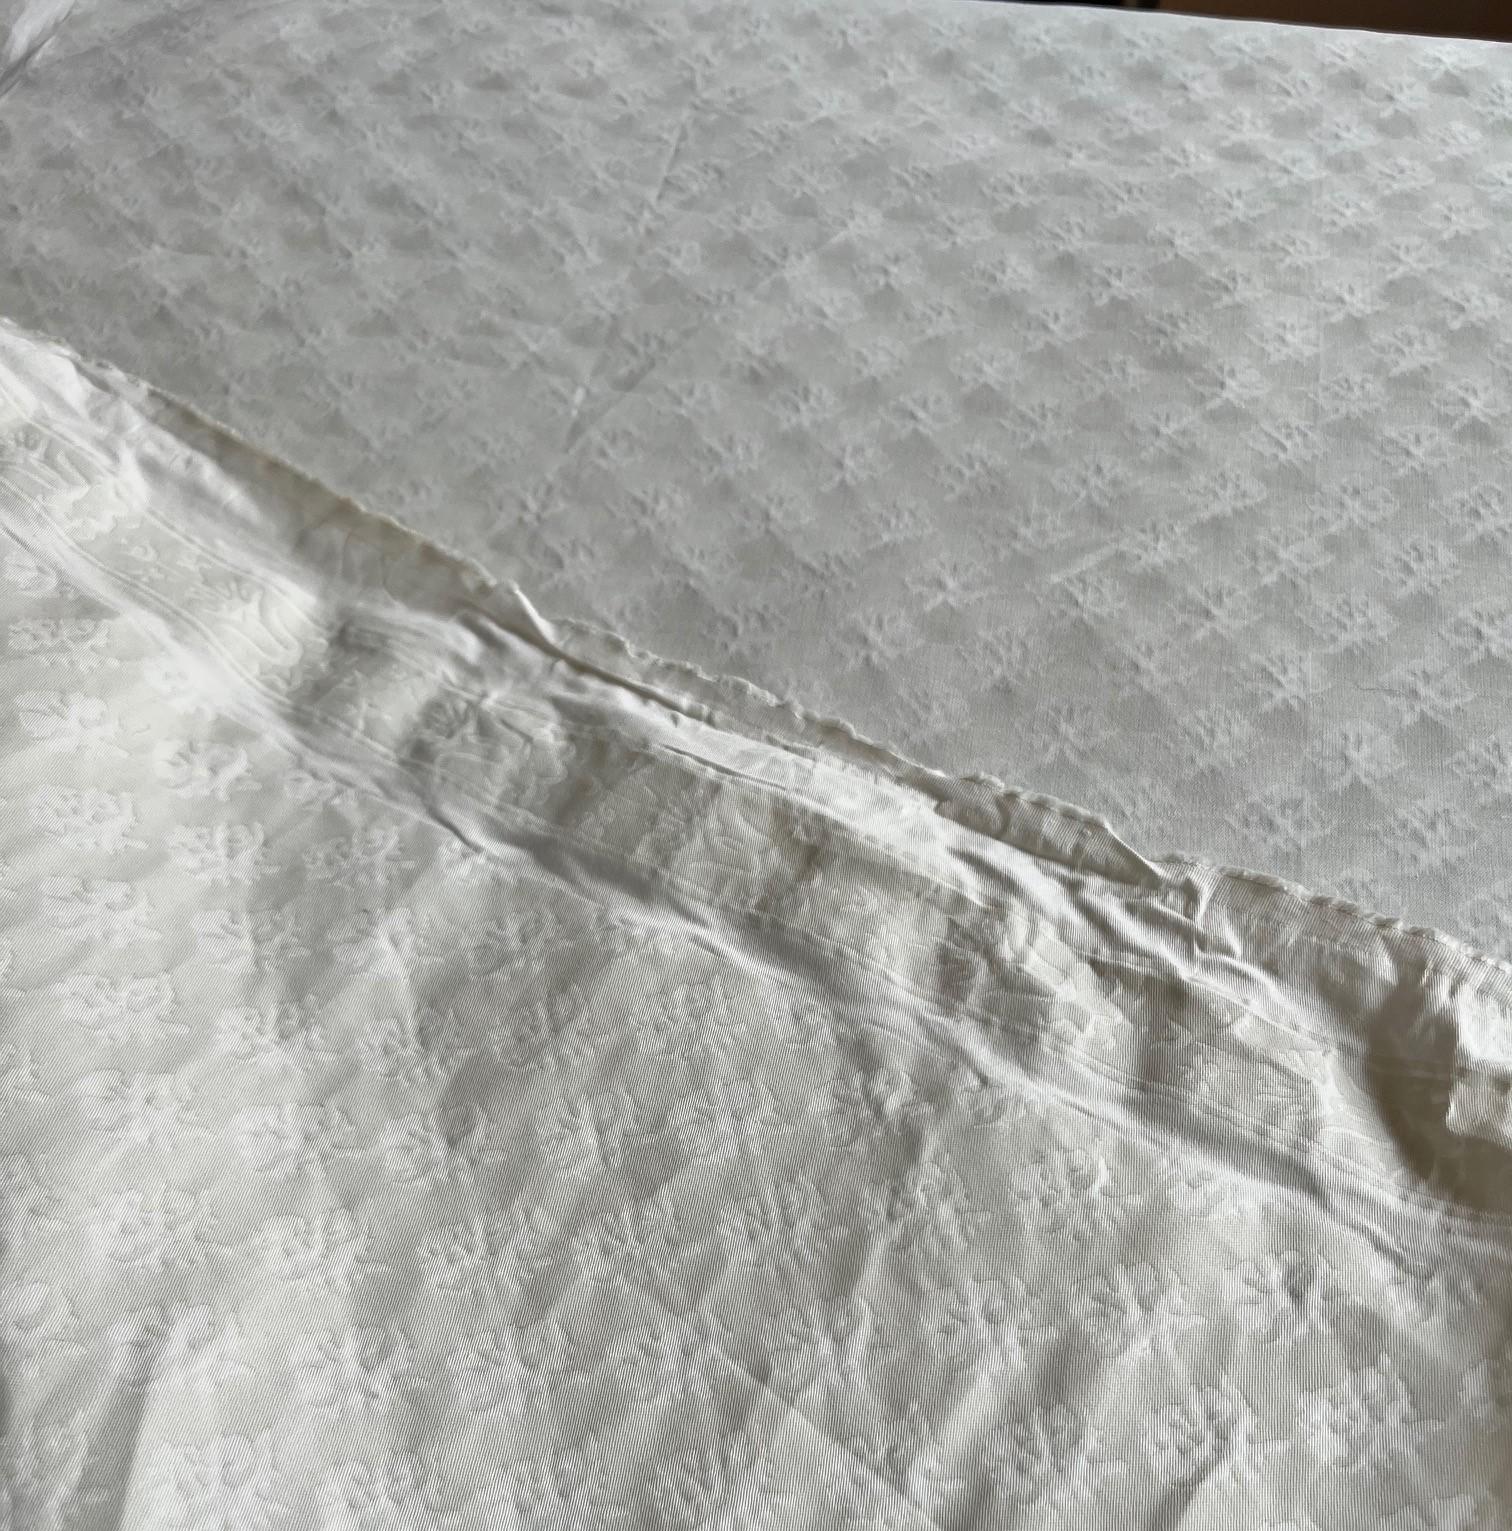 Venetian Fortuny Persiano Fabric in White on White, 2 Yards In Good Condition For Sale In Morristown, NJ